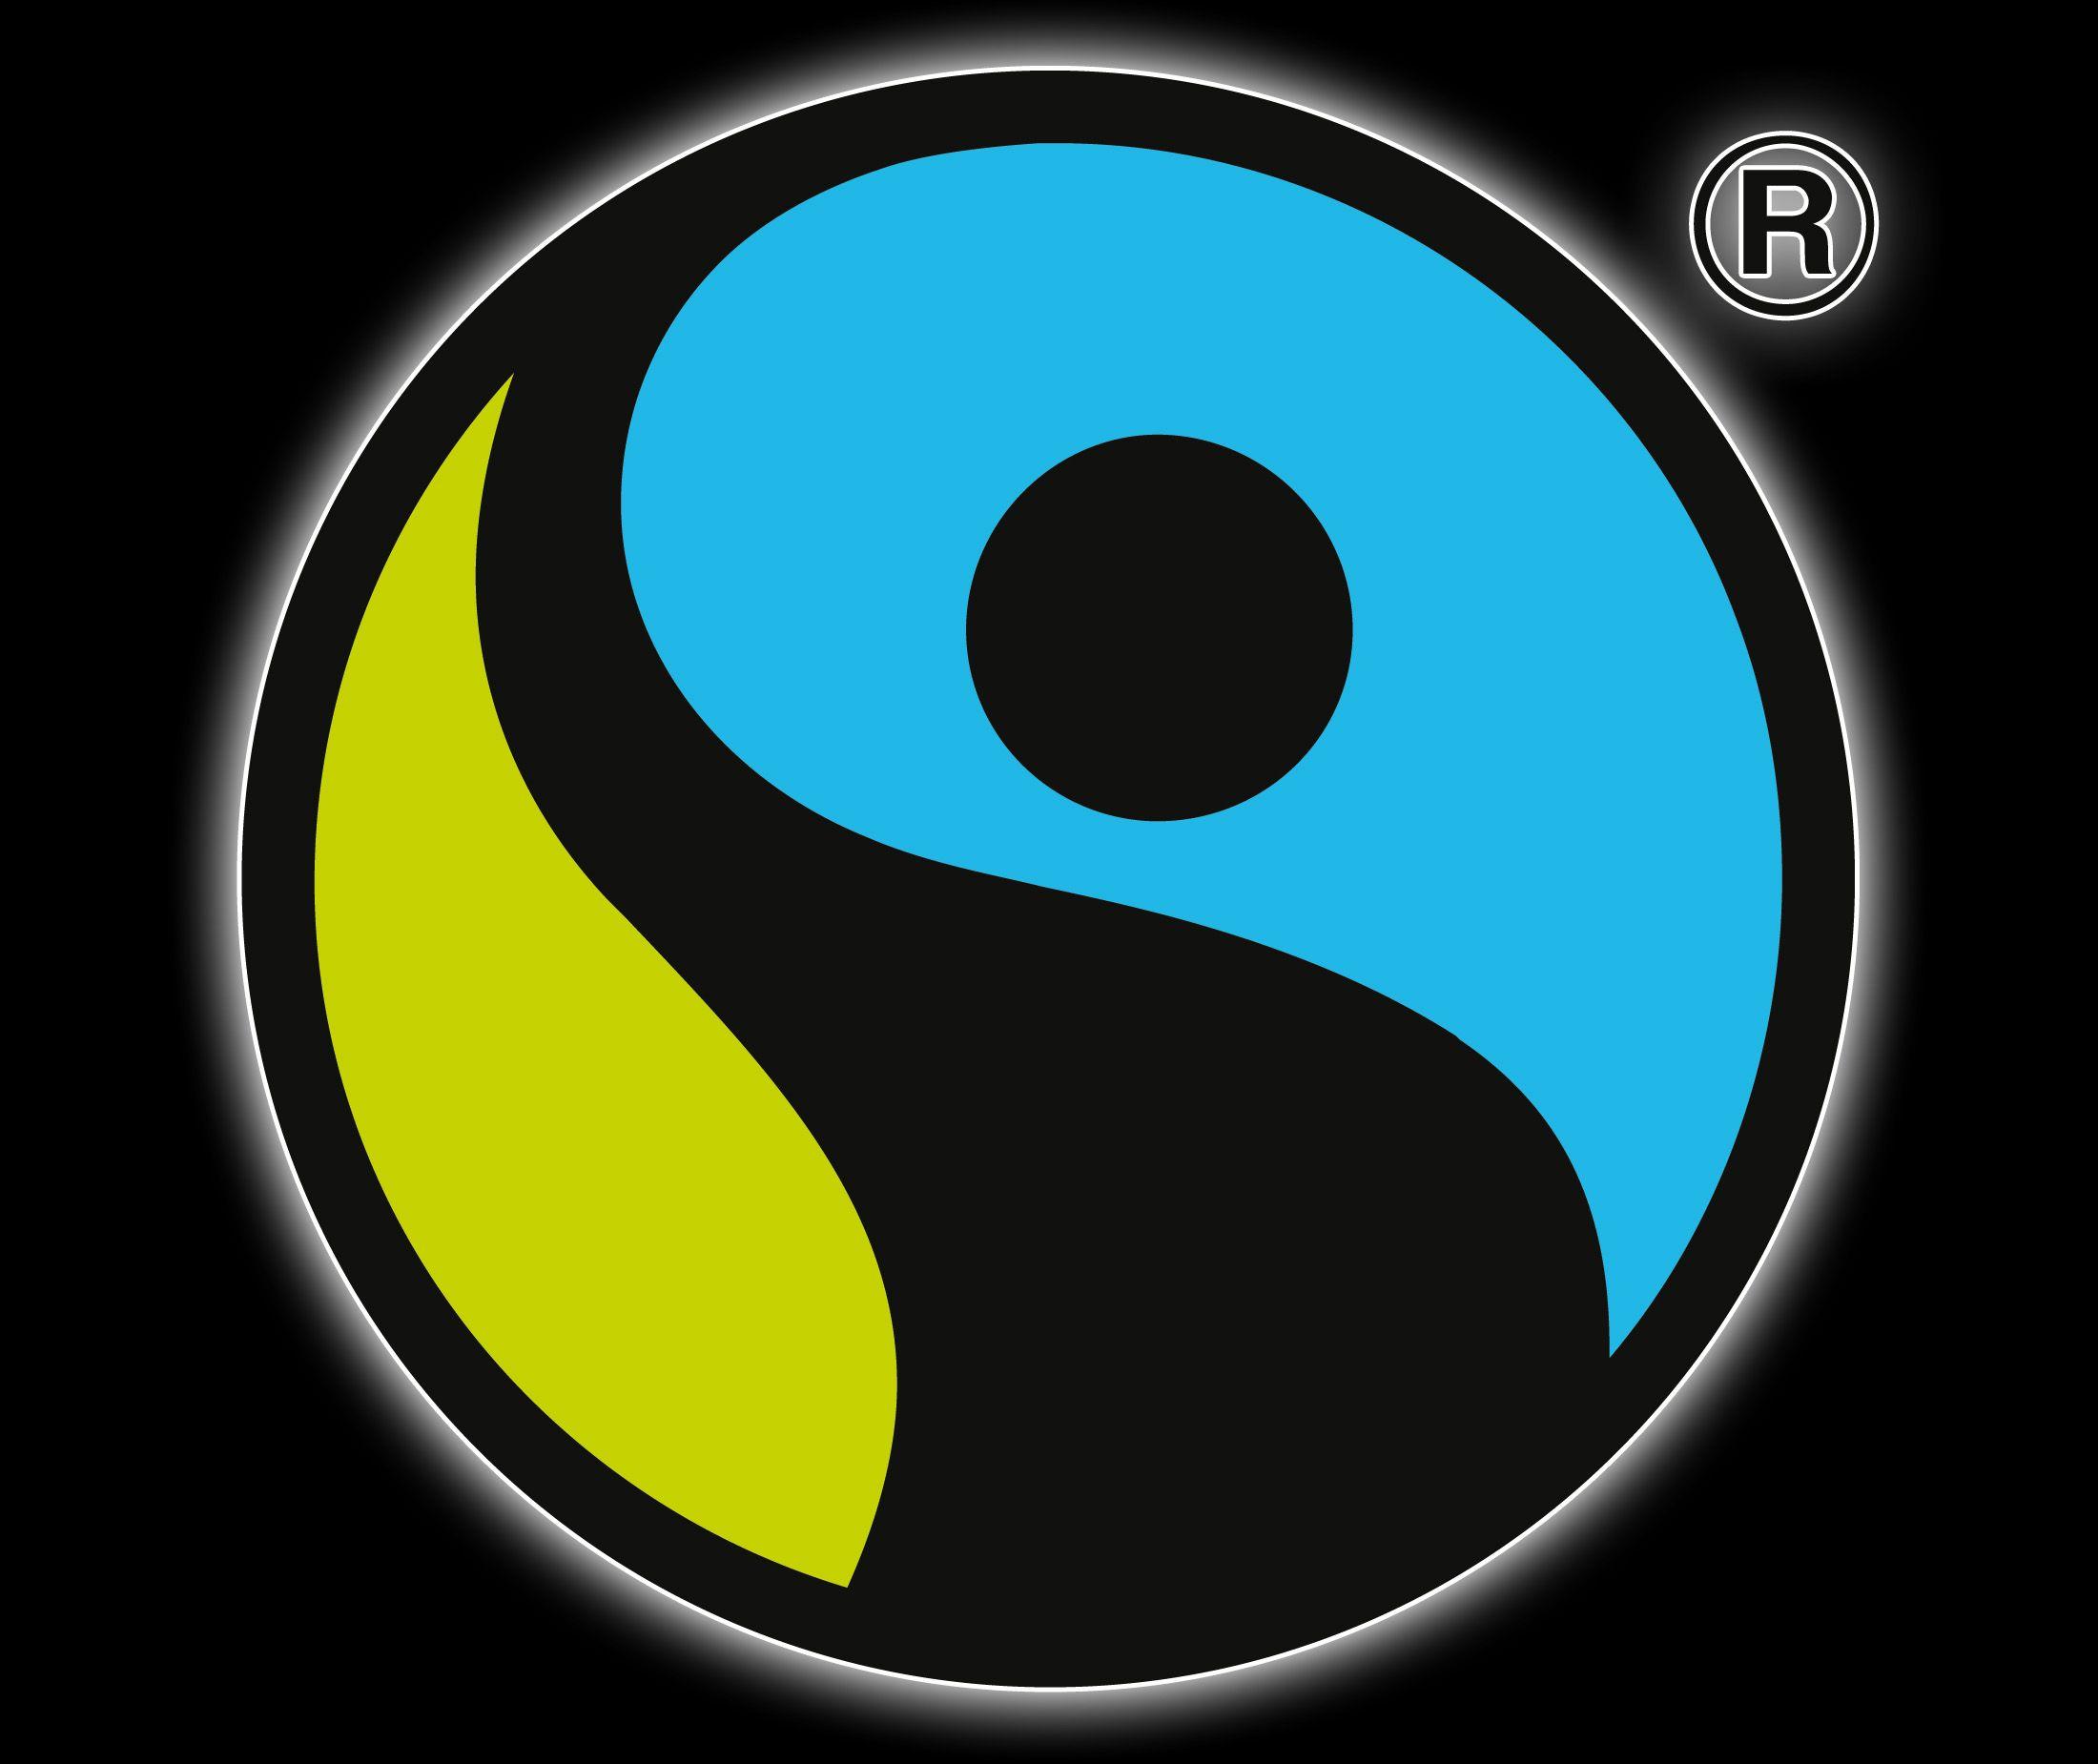 Blue and Green Circle Logo - Fairtrade Logo, Fairtrade Symbol, Meaning, History and Evolution